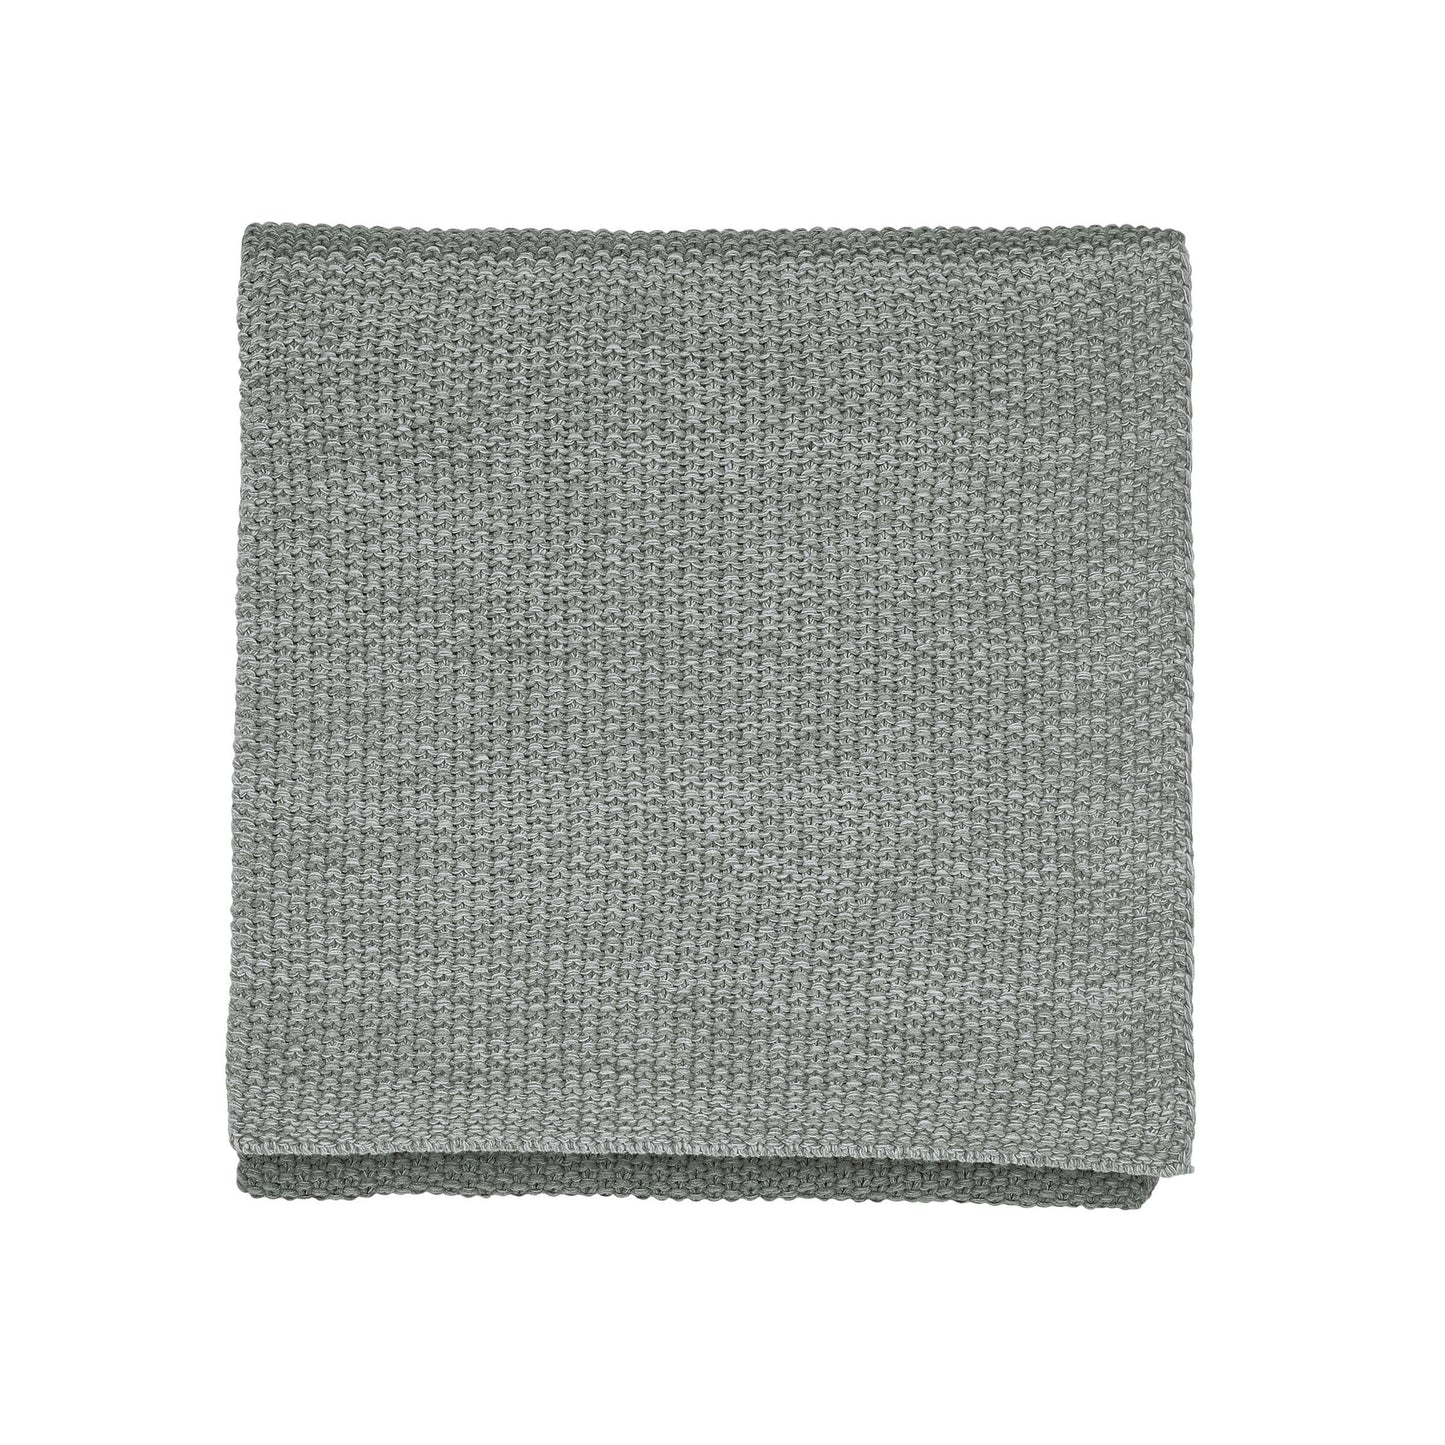 Flo Knitted Throw, Cloud Grey